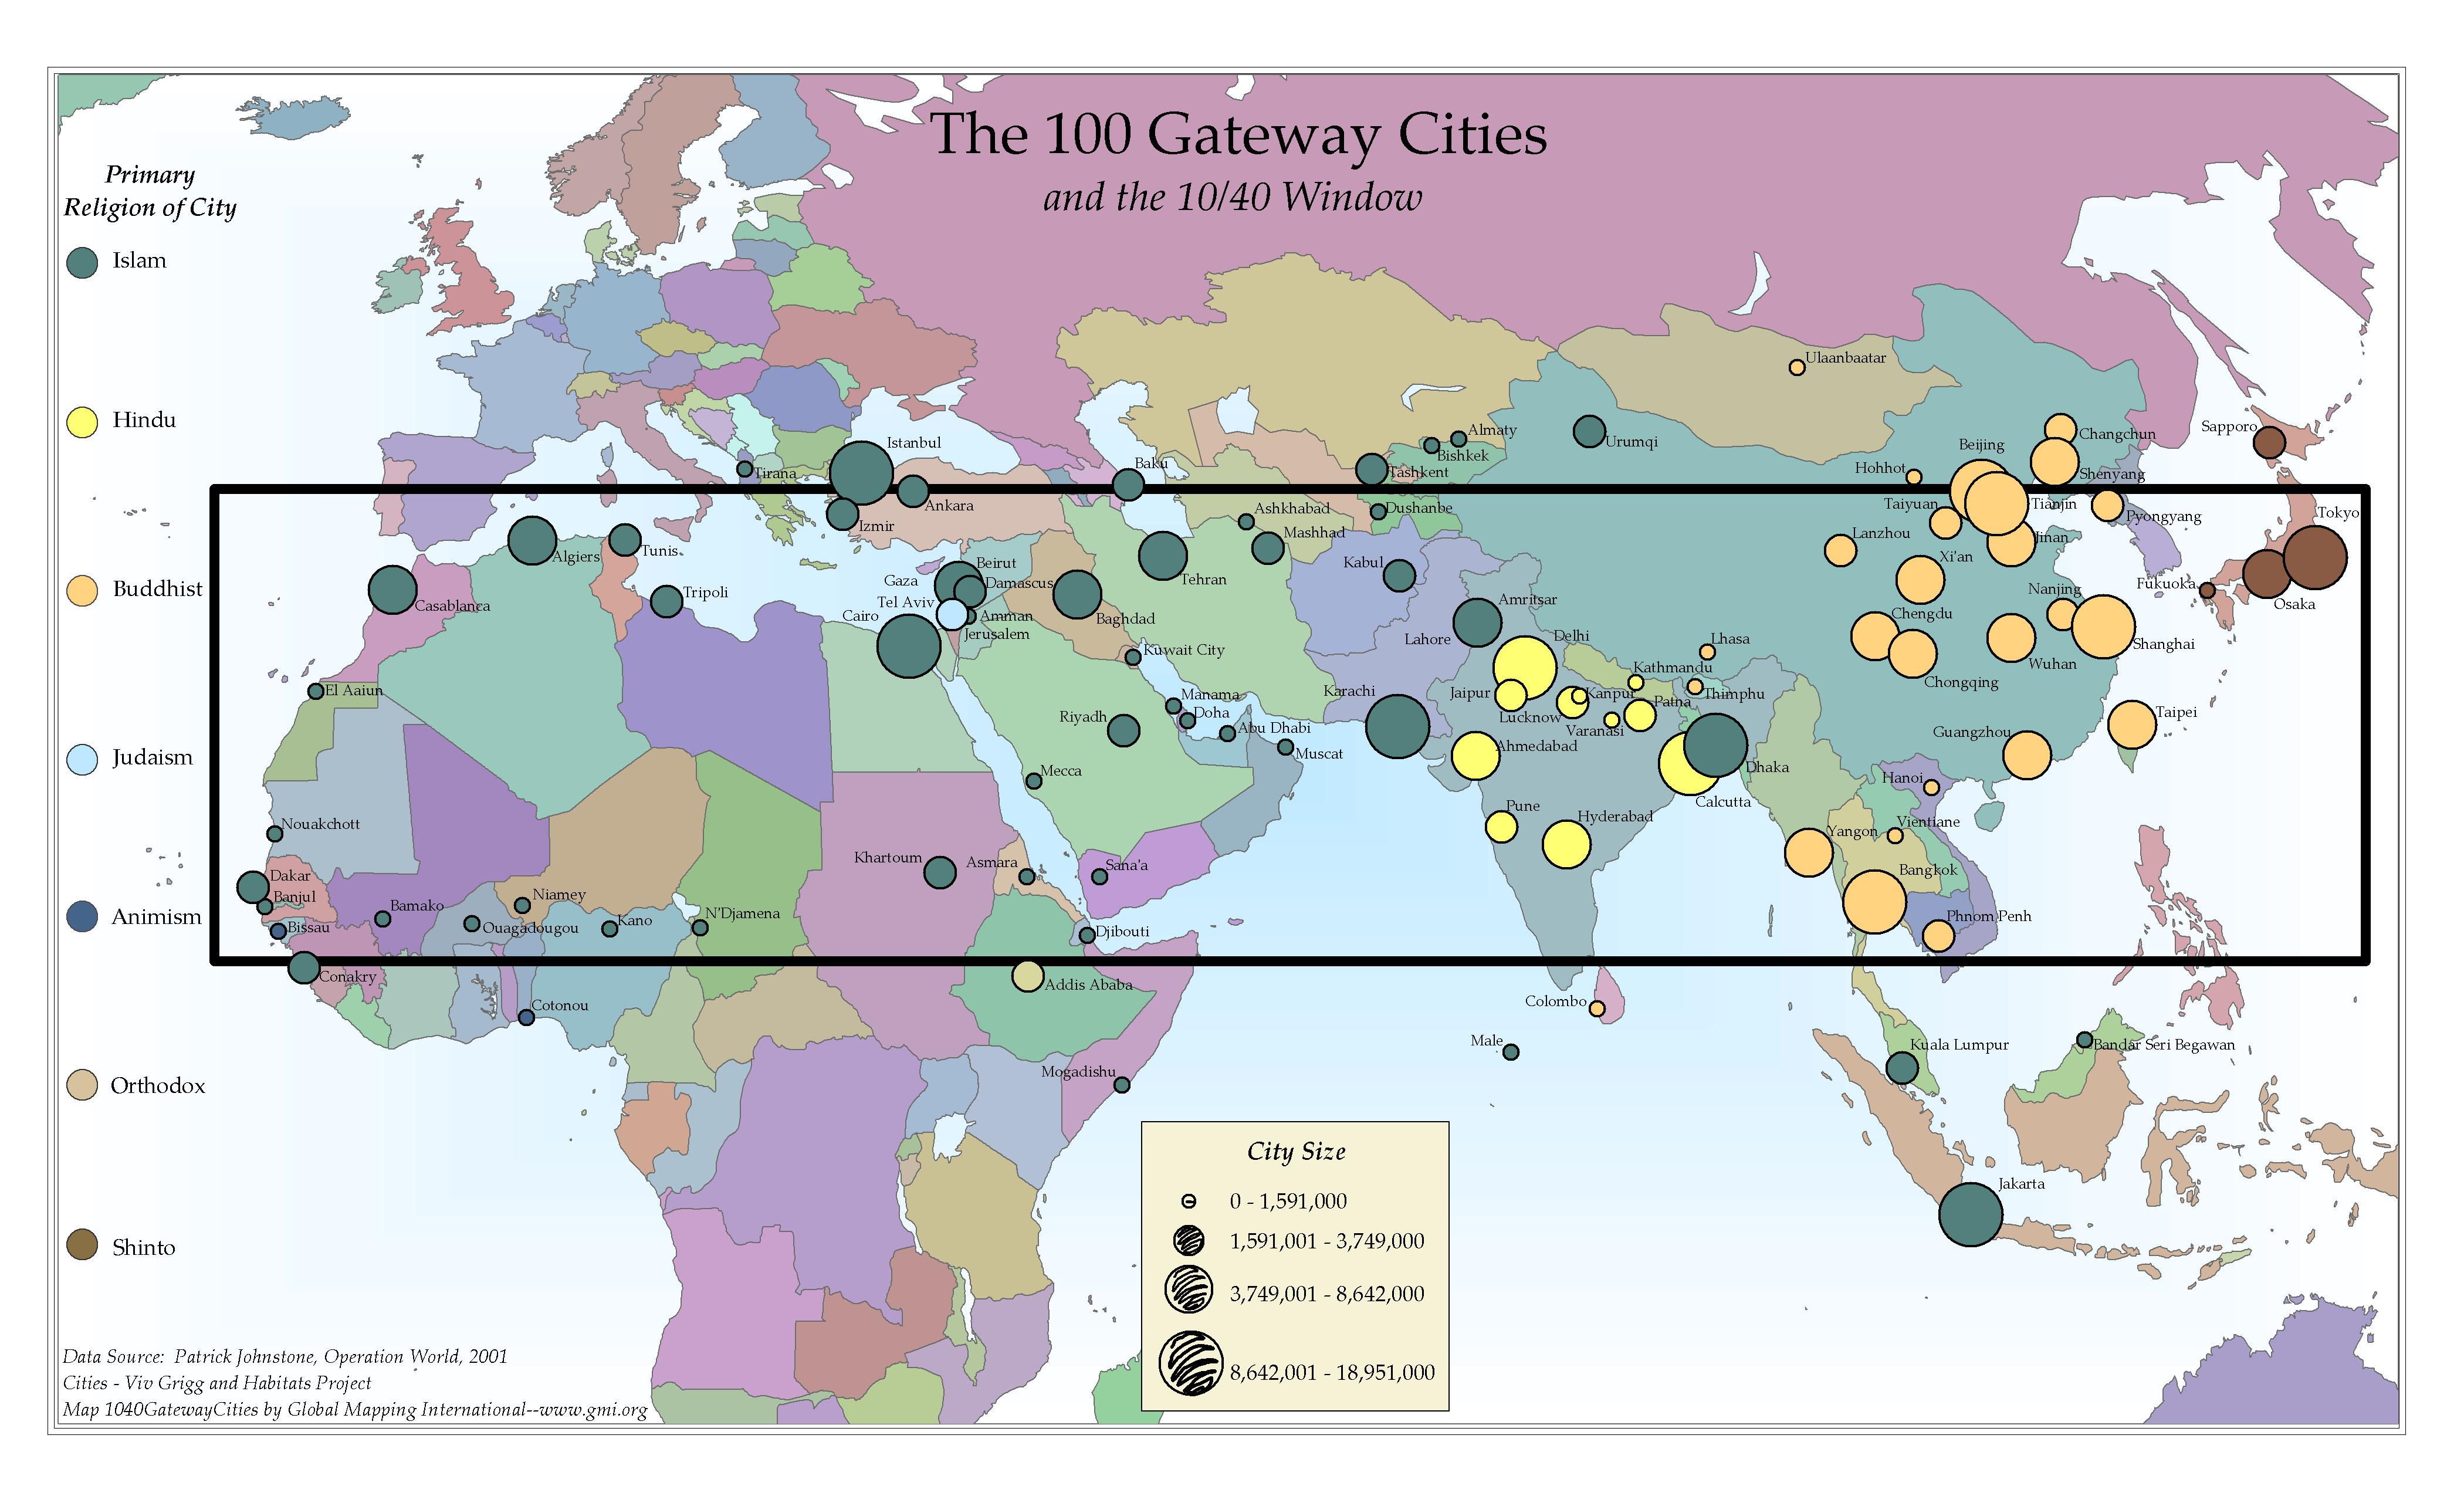 The 100 Gateway Cities and the 10/40 Window